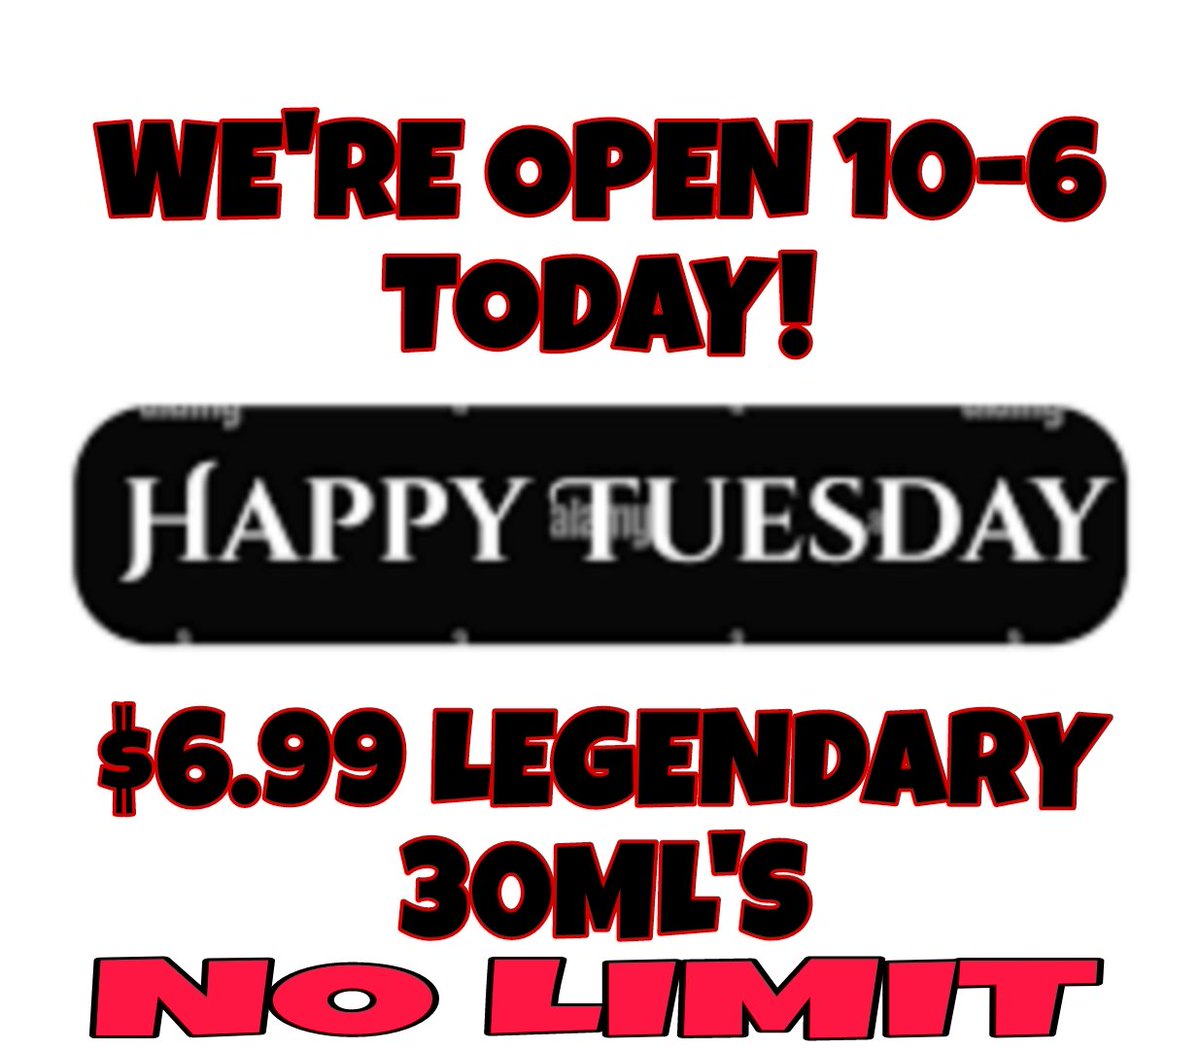 HAPPY TUESDAY!  #Legendary #Deals #stockup #sale #smok #geekvape #sebring #florida #nolimit #saltnic #disposables #supportlocal #ShopLocal #momandpopshop #WeGotWhatYouNeed #Czar #Raz #lostmary #HQD #Orion ##NoLimit and more BEST PRICES IN TOWN!